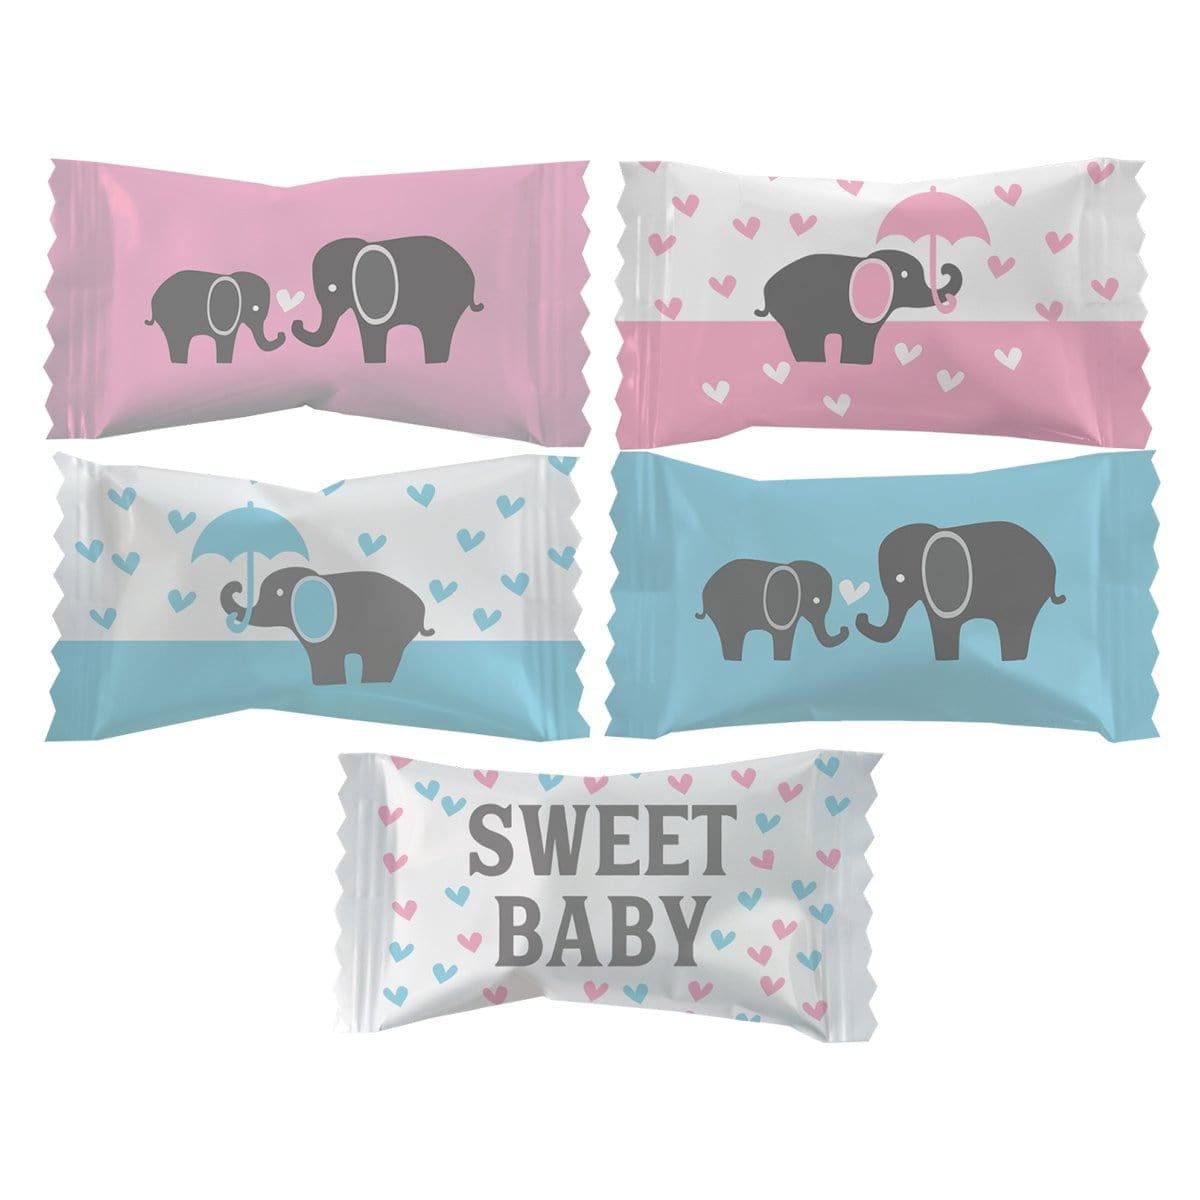 Buy Candy 7oz Buttermints Sweet Baby sold at Party Expert